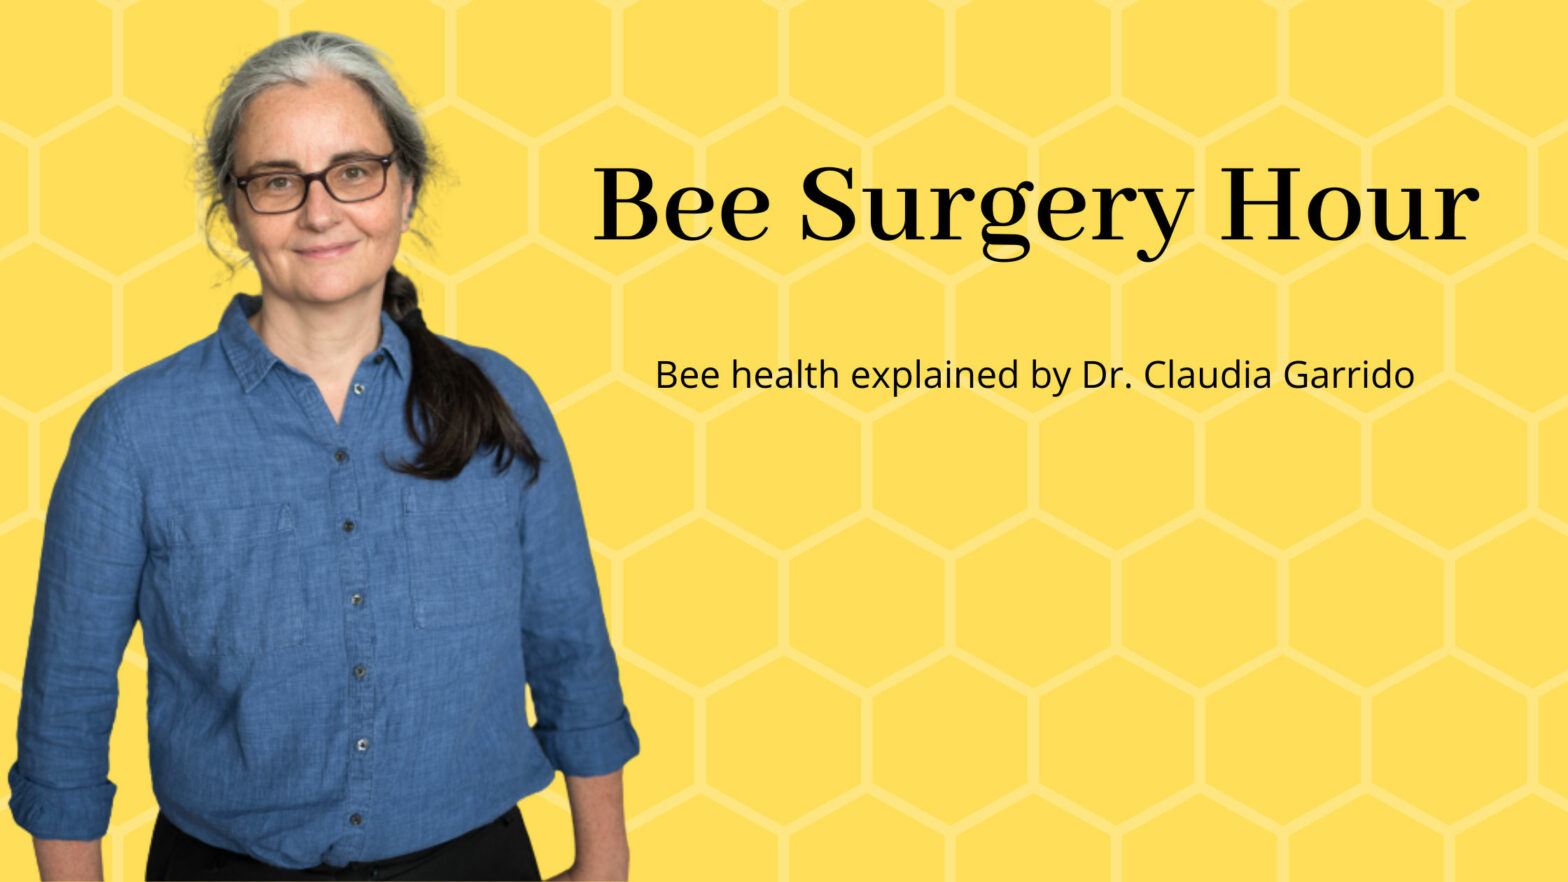 good practices, glory in prevention, honey bee health, oxalic acid treatments, Bee Surgery Hours